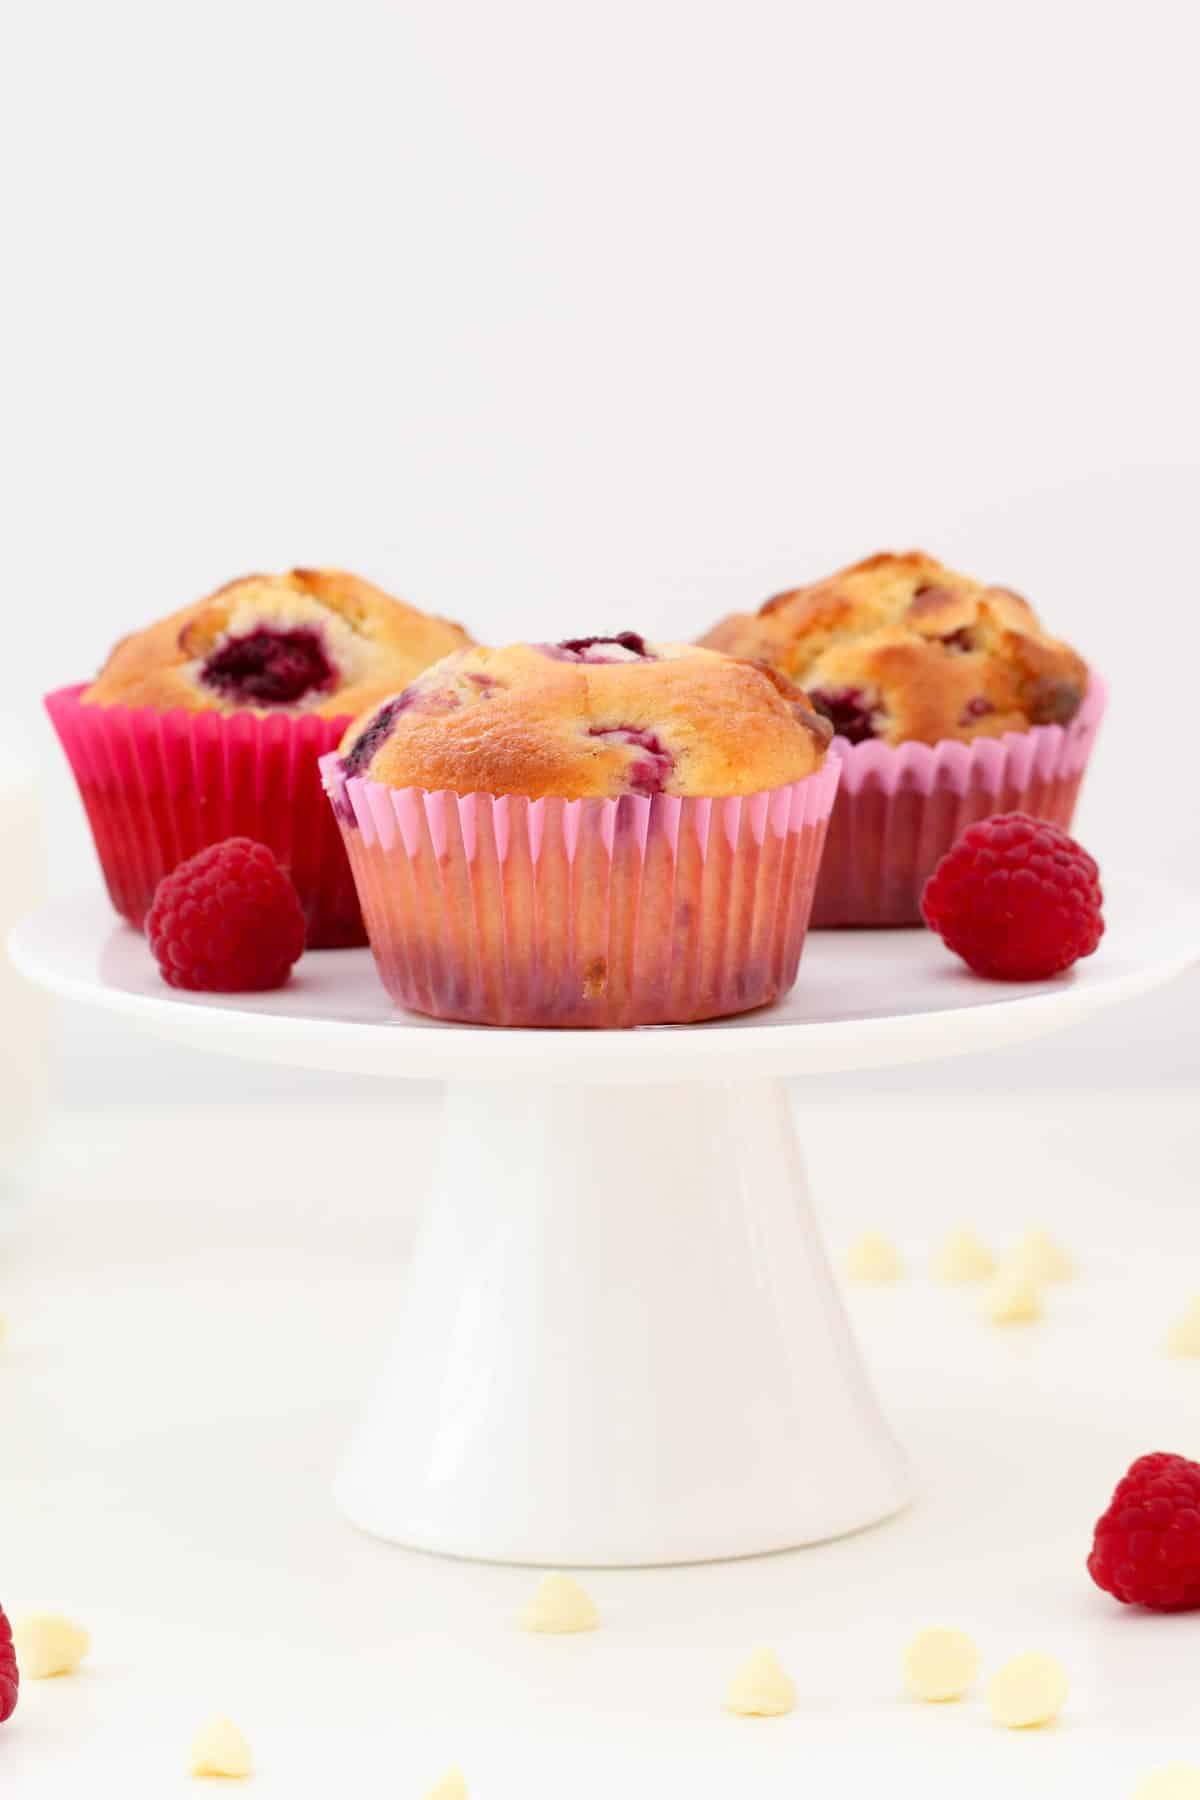 Three muffins in pink paper cases on a white cake stand.